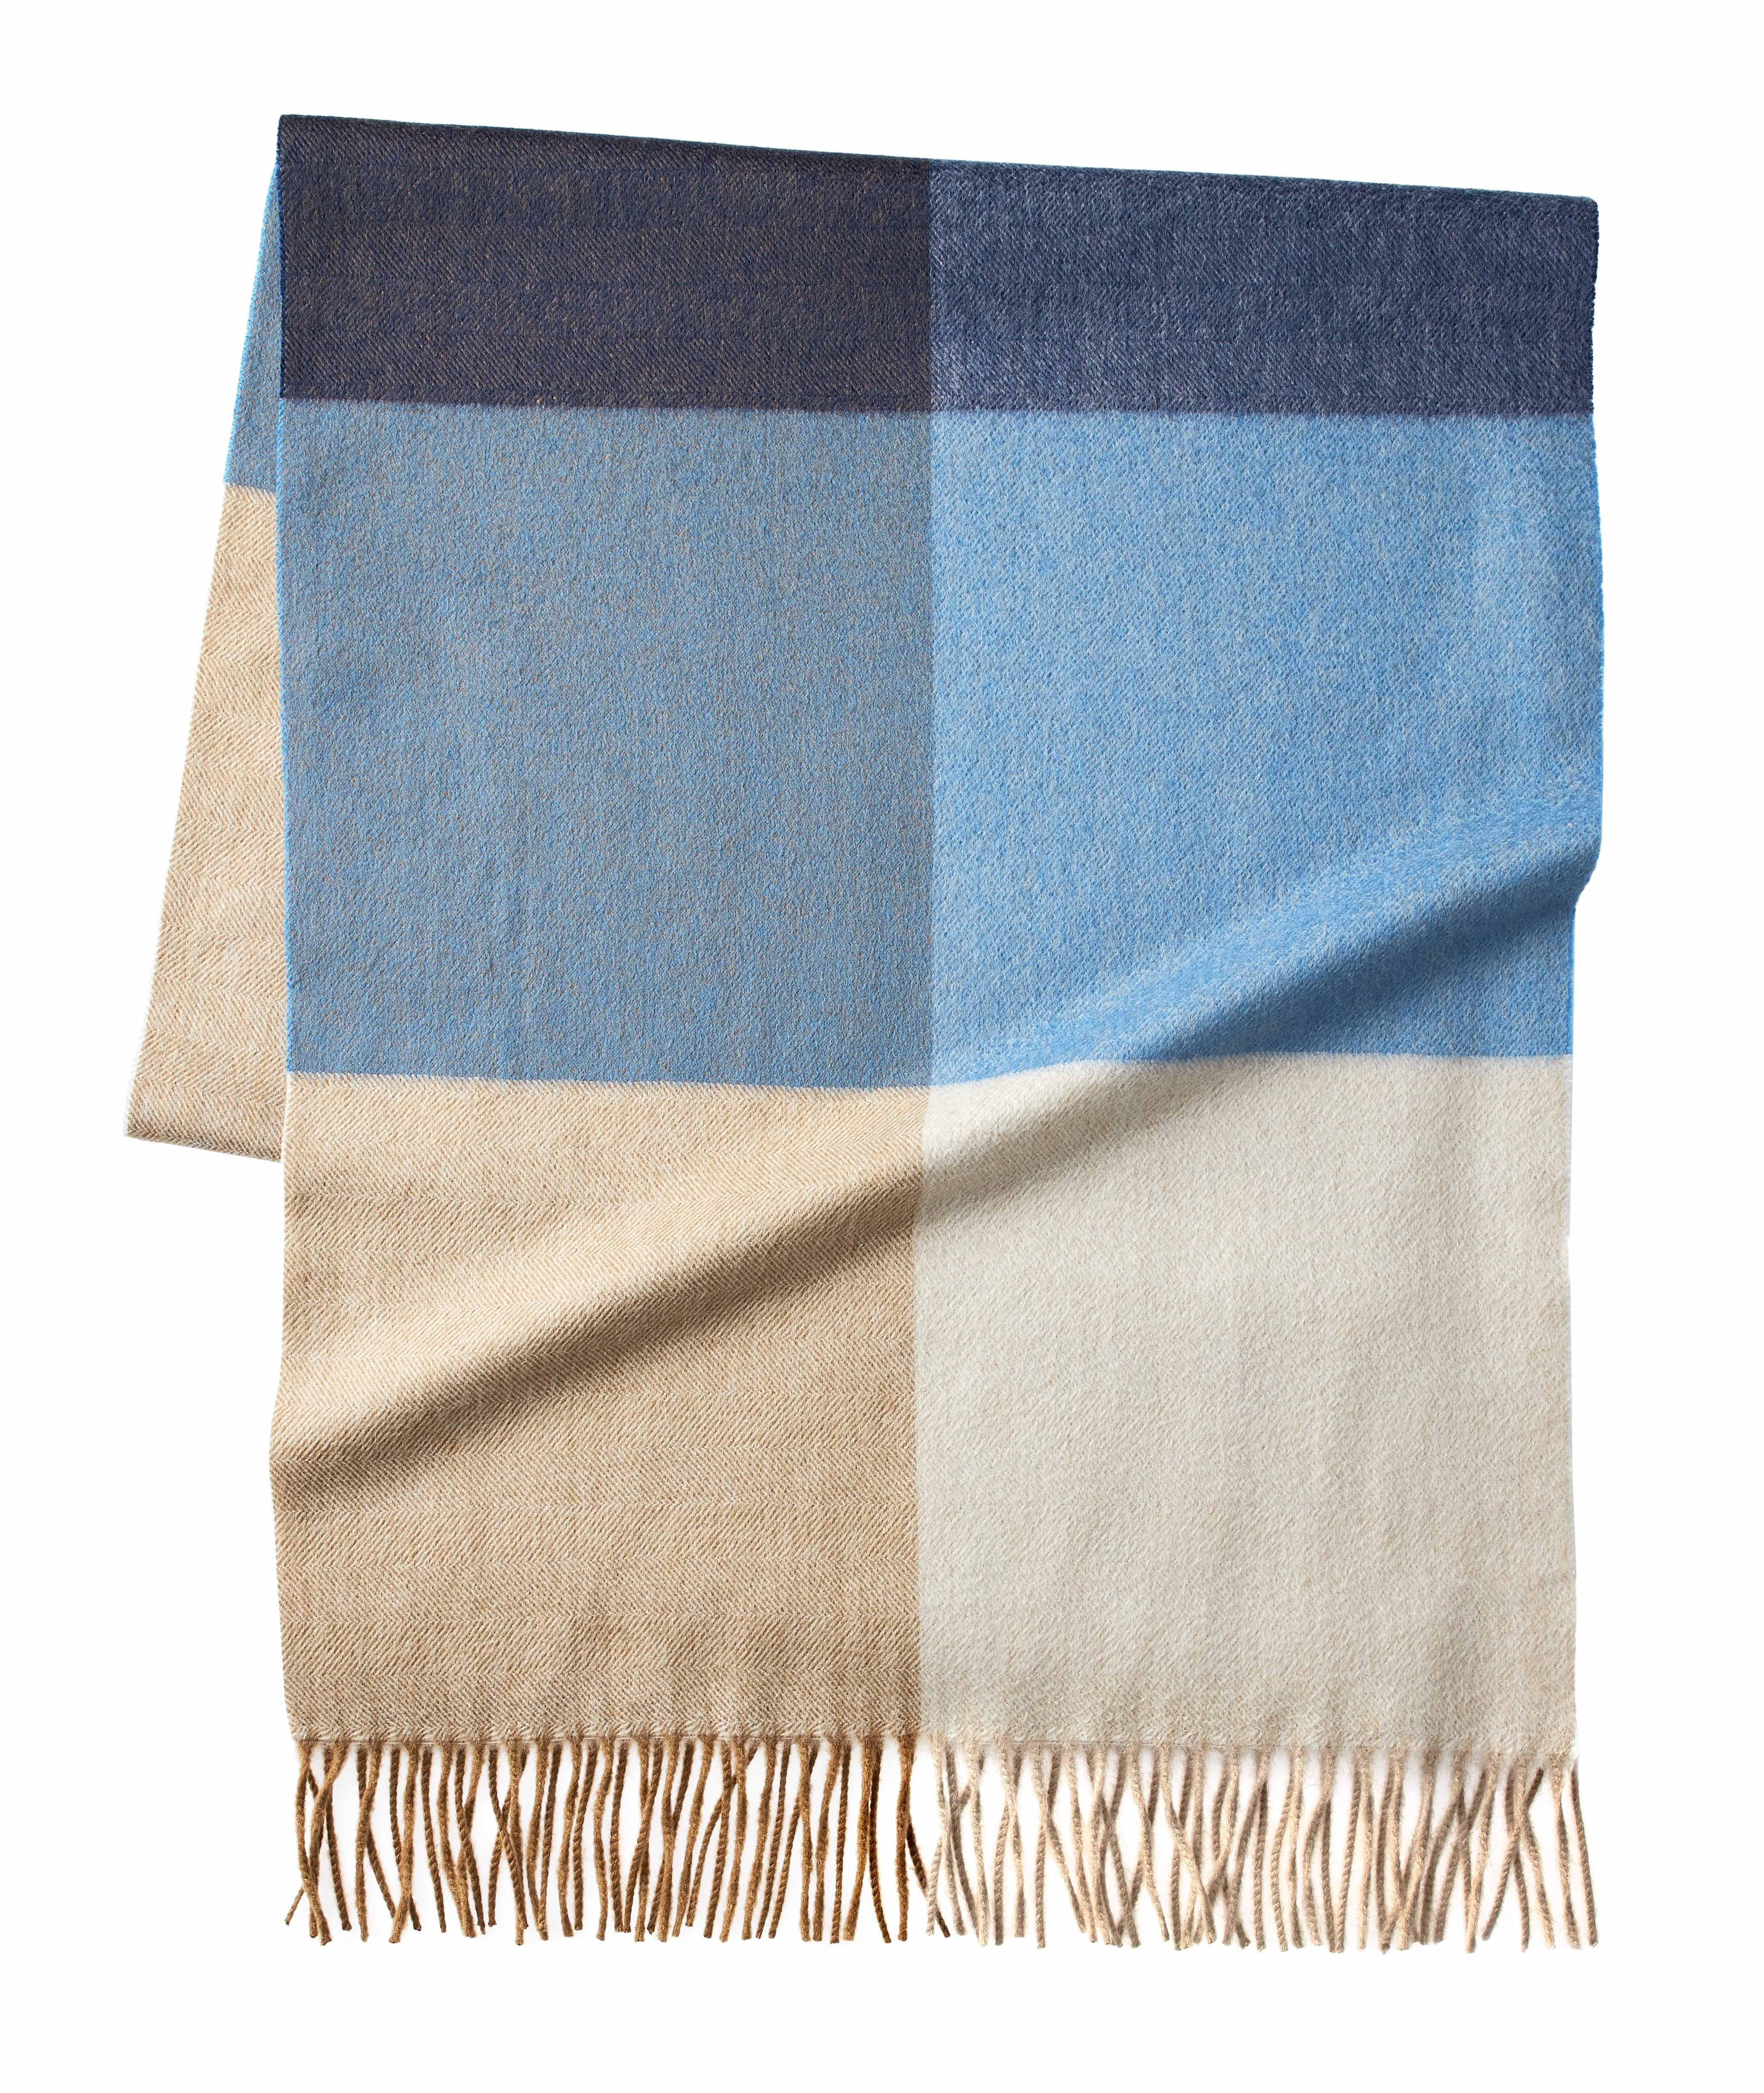 Checked Cashmere Scarf image 0